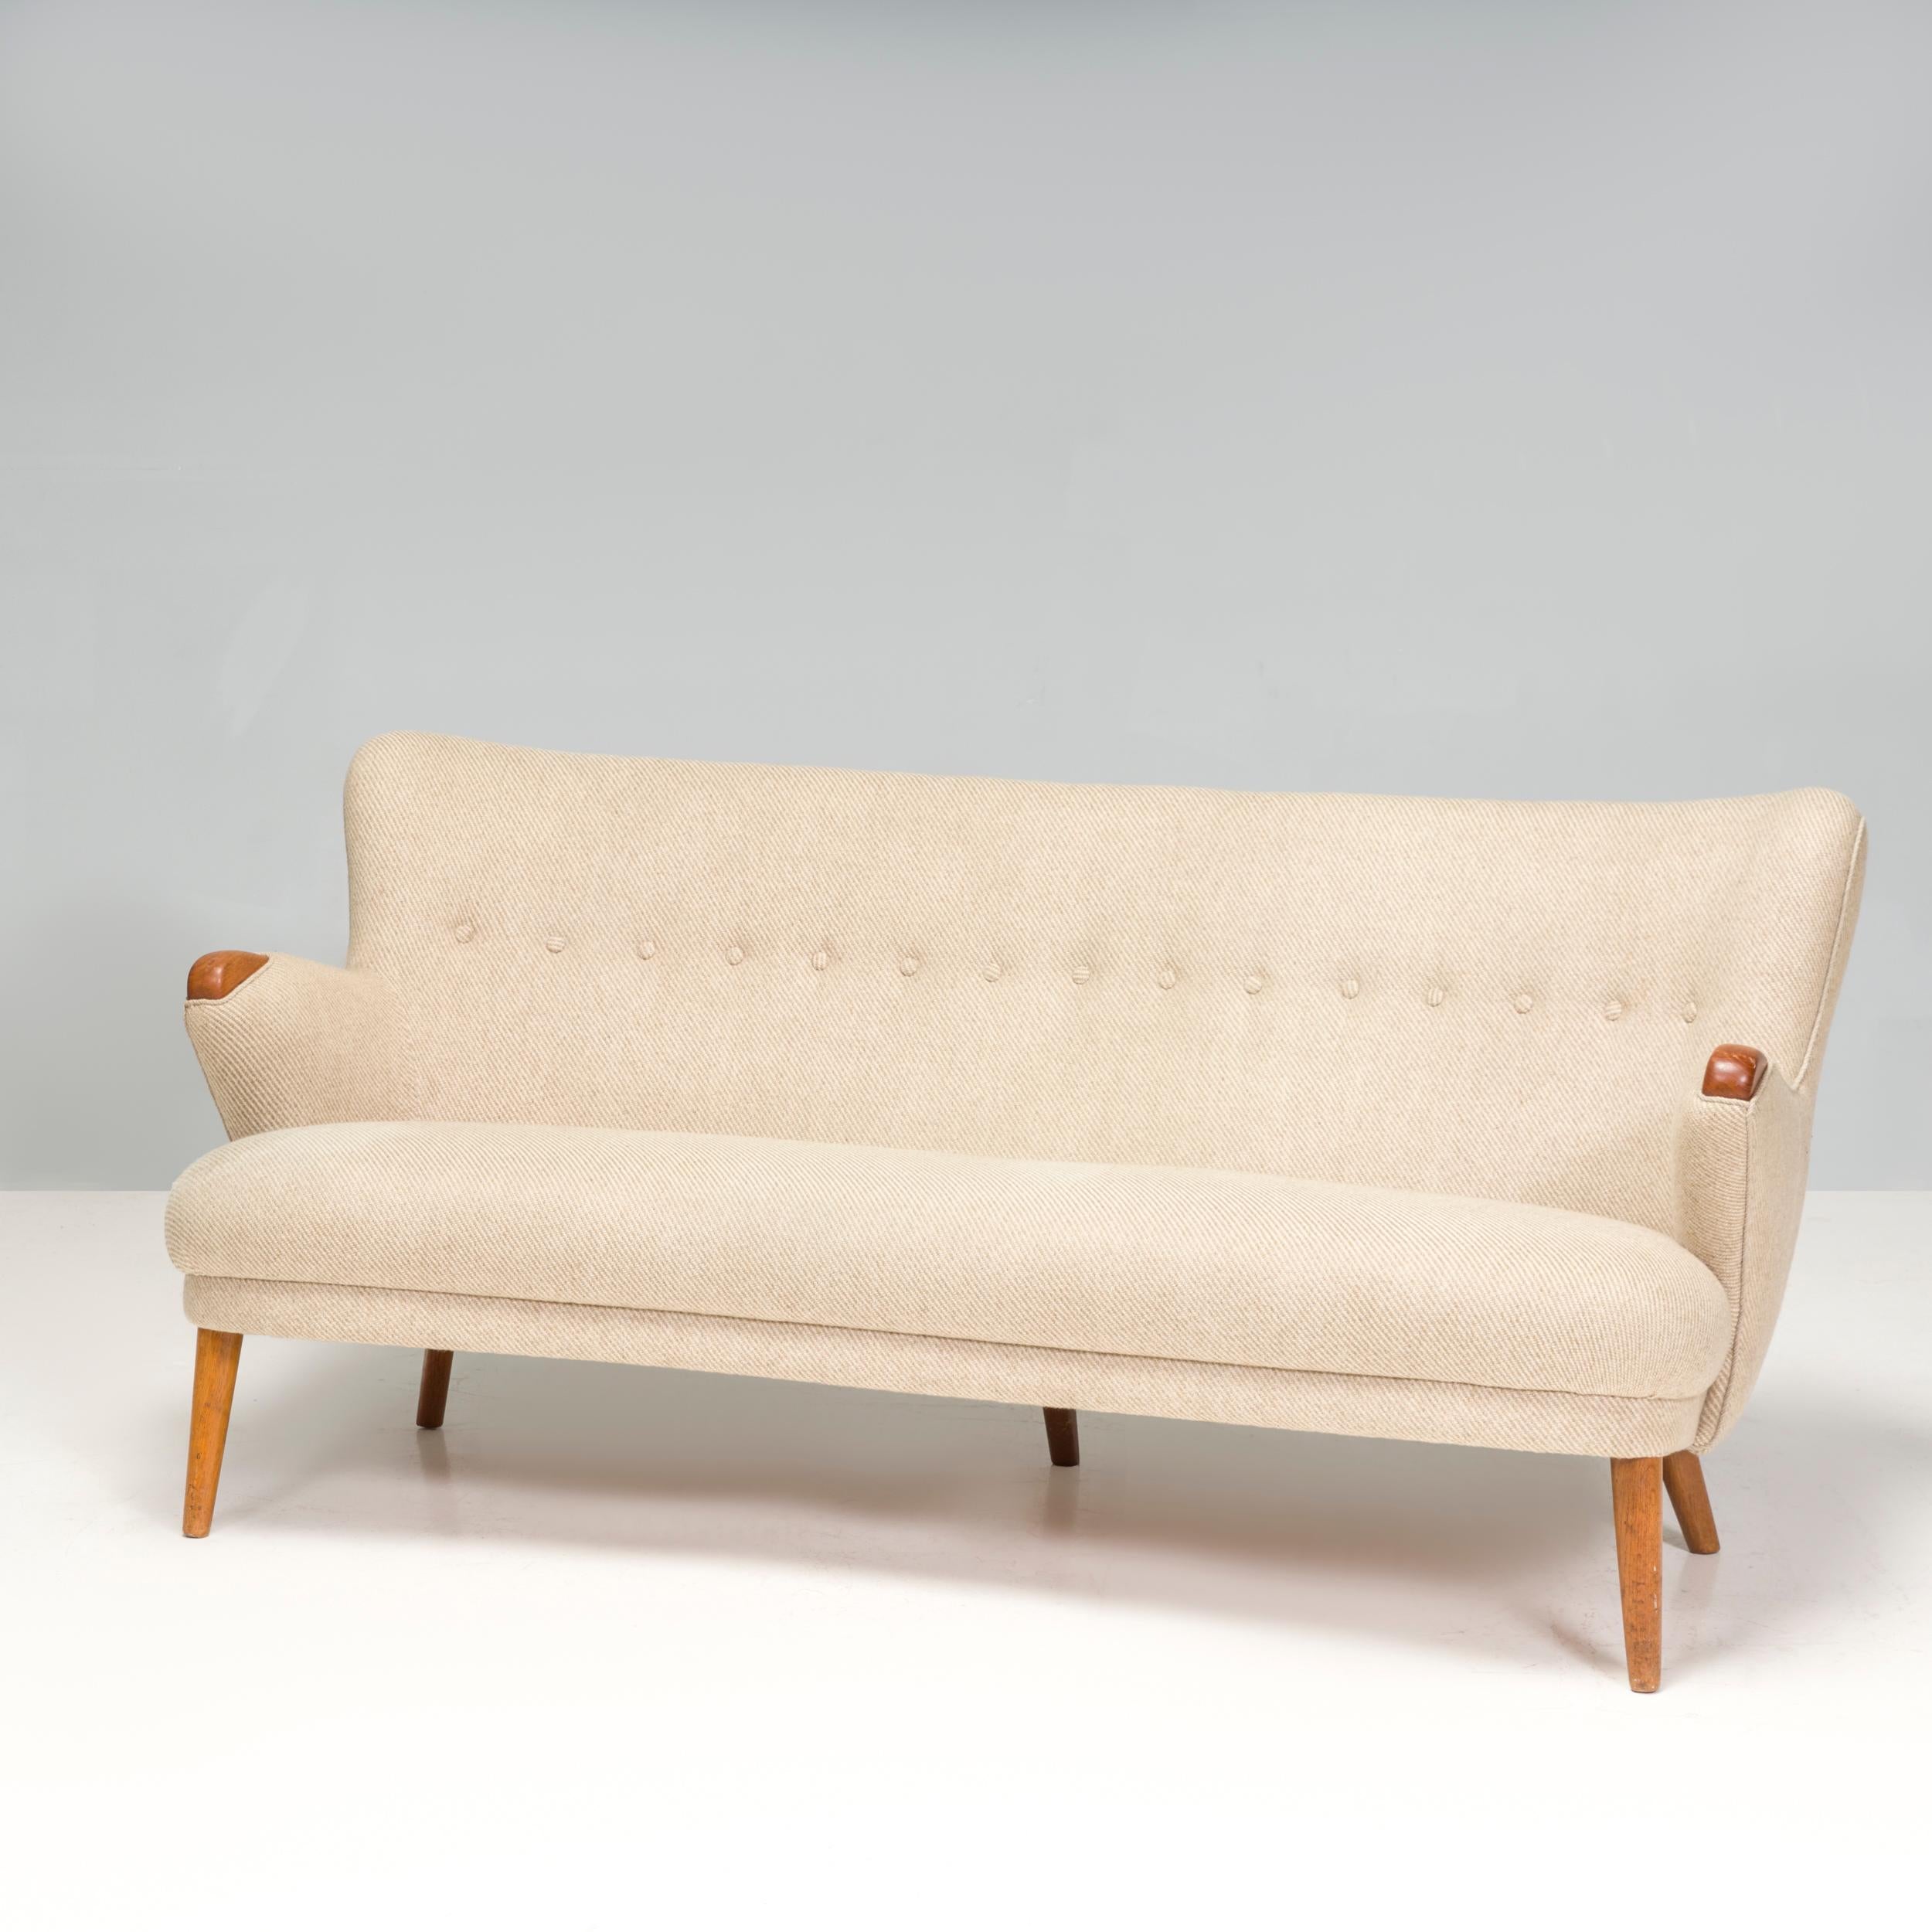 Mid-Century Modern Danish sofa in the style of Kurt Olsen 
This organic form curved sofa is upholstered in a gorgeous tan wool mix fabric.

Shelved back buttoned sofa with teak legs and handcrafted wood frame with sculpted teak arms pads. Original